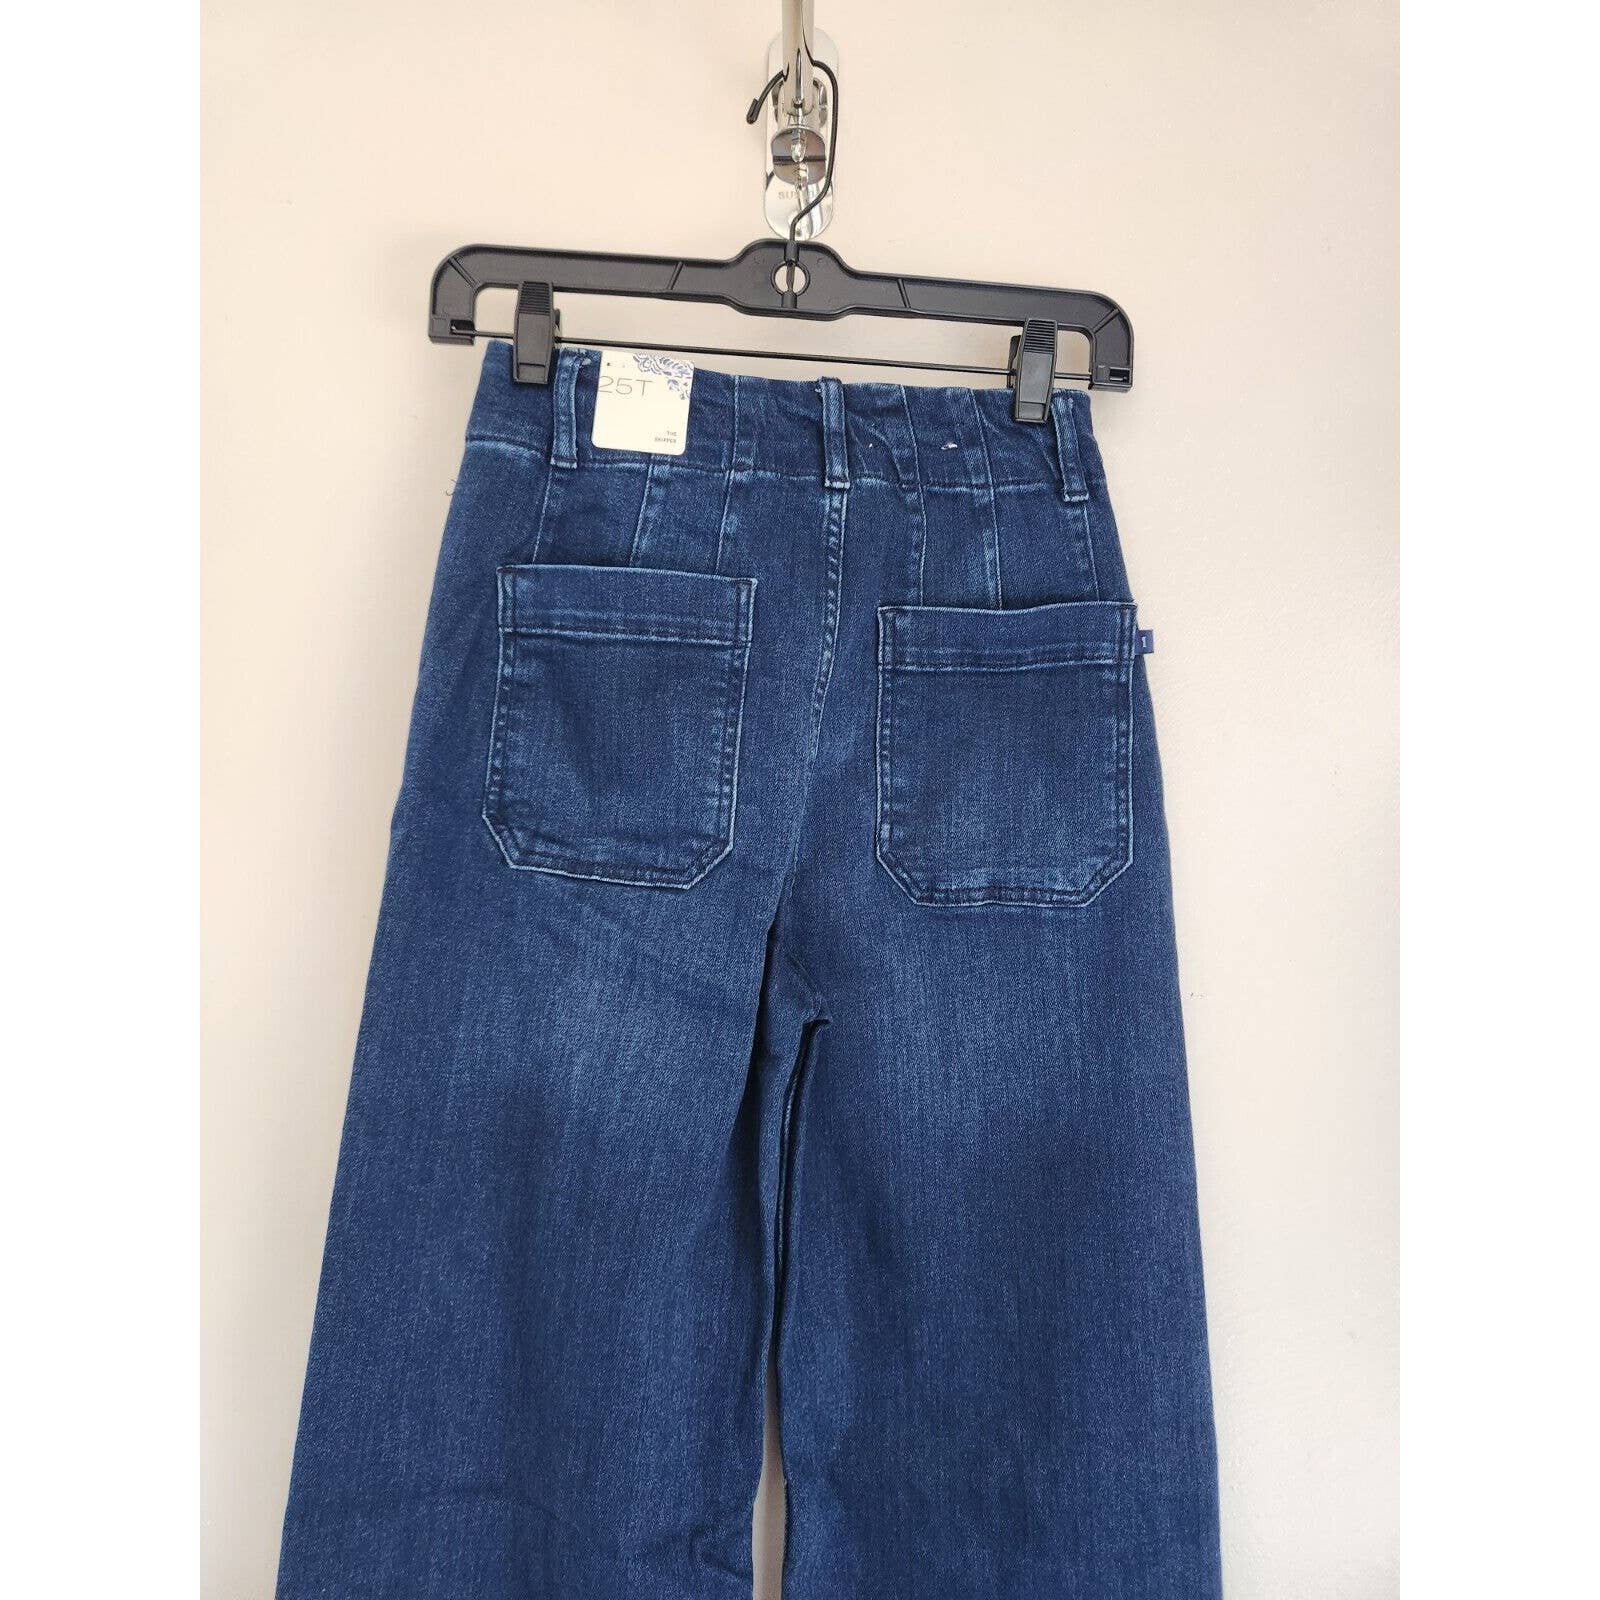 Latest  NWT Anthropologie Pilcro The Skipper Cropped Wide-Leg Jeans Size 25 Tall Denim nHEdlGqo0 Cheap